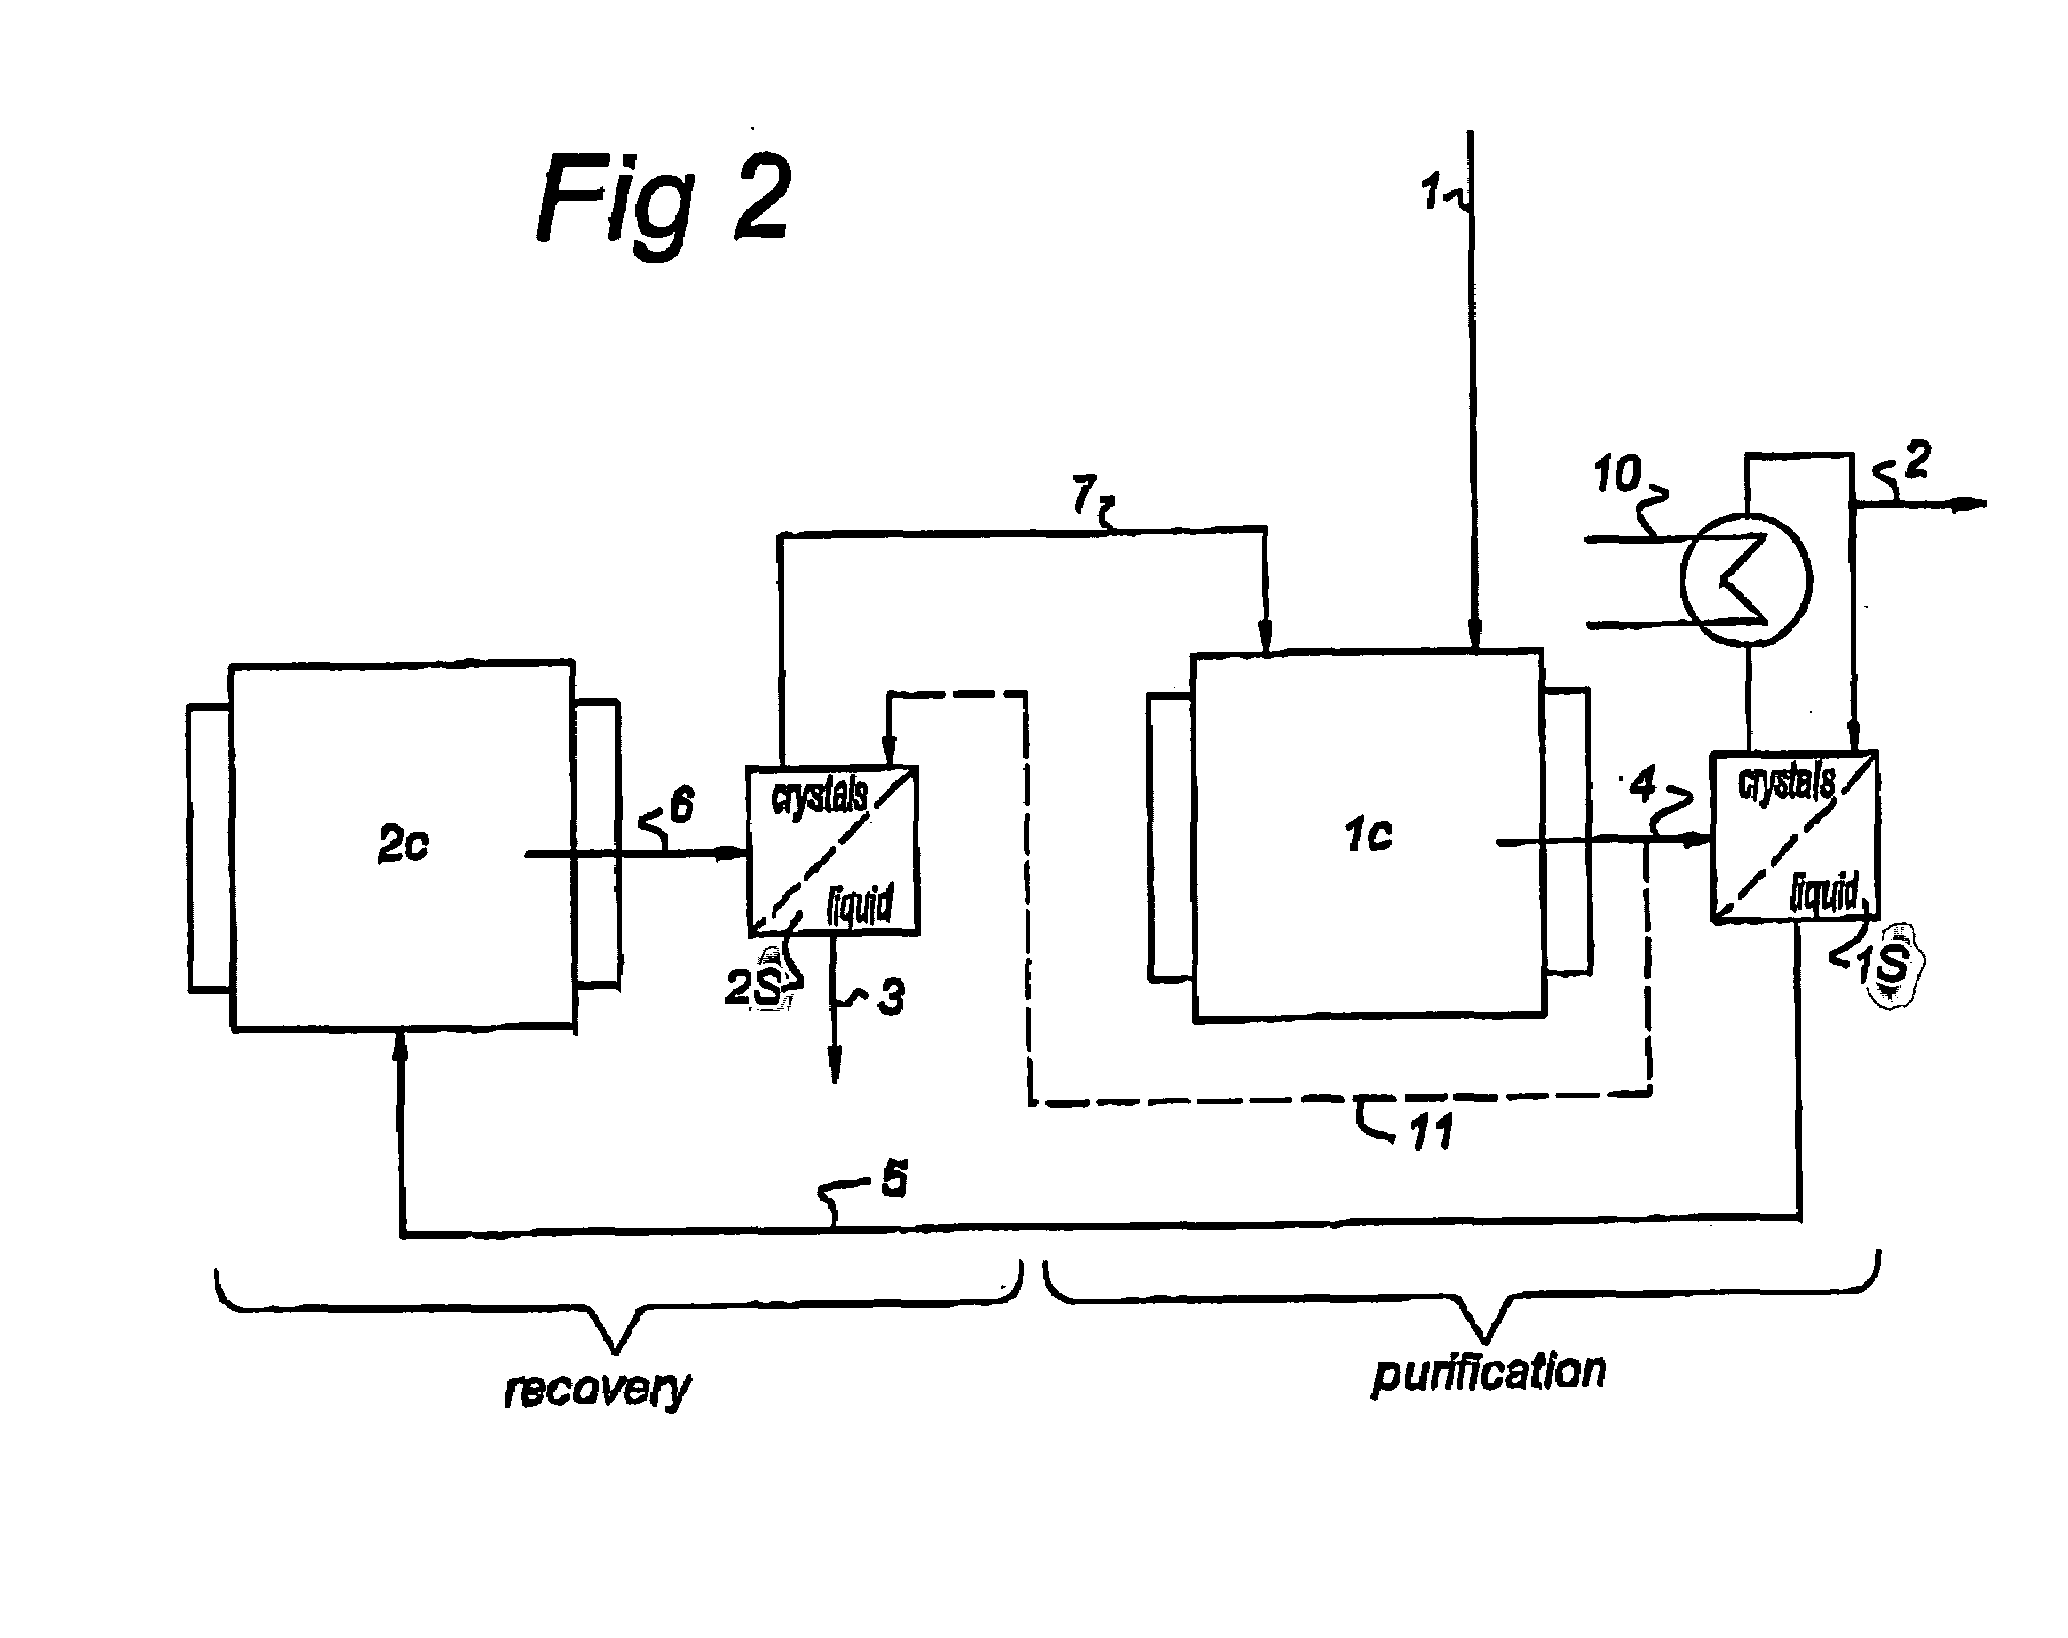 Method and apparatus for recovering a pure substance from an impure solution by crystallization